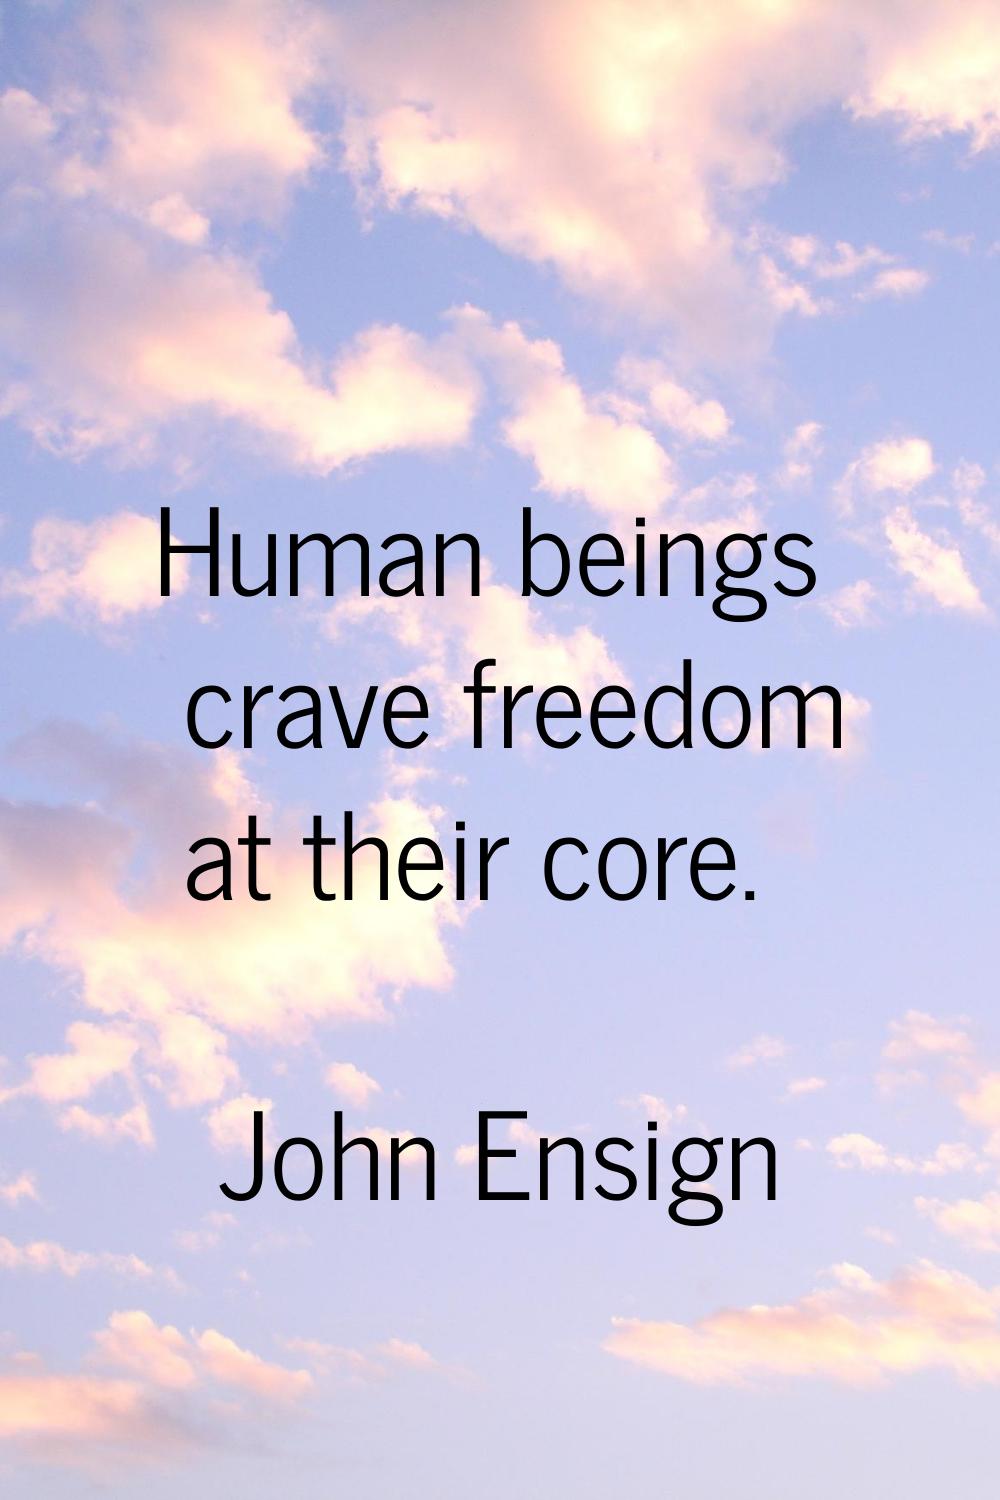 Human beings crave freedom at their core.